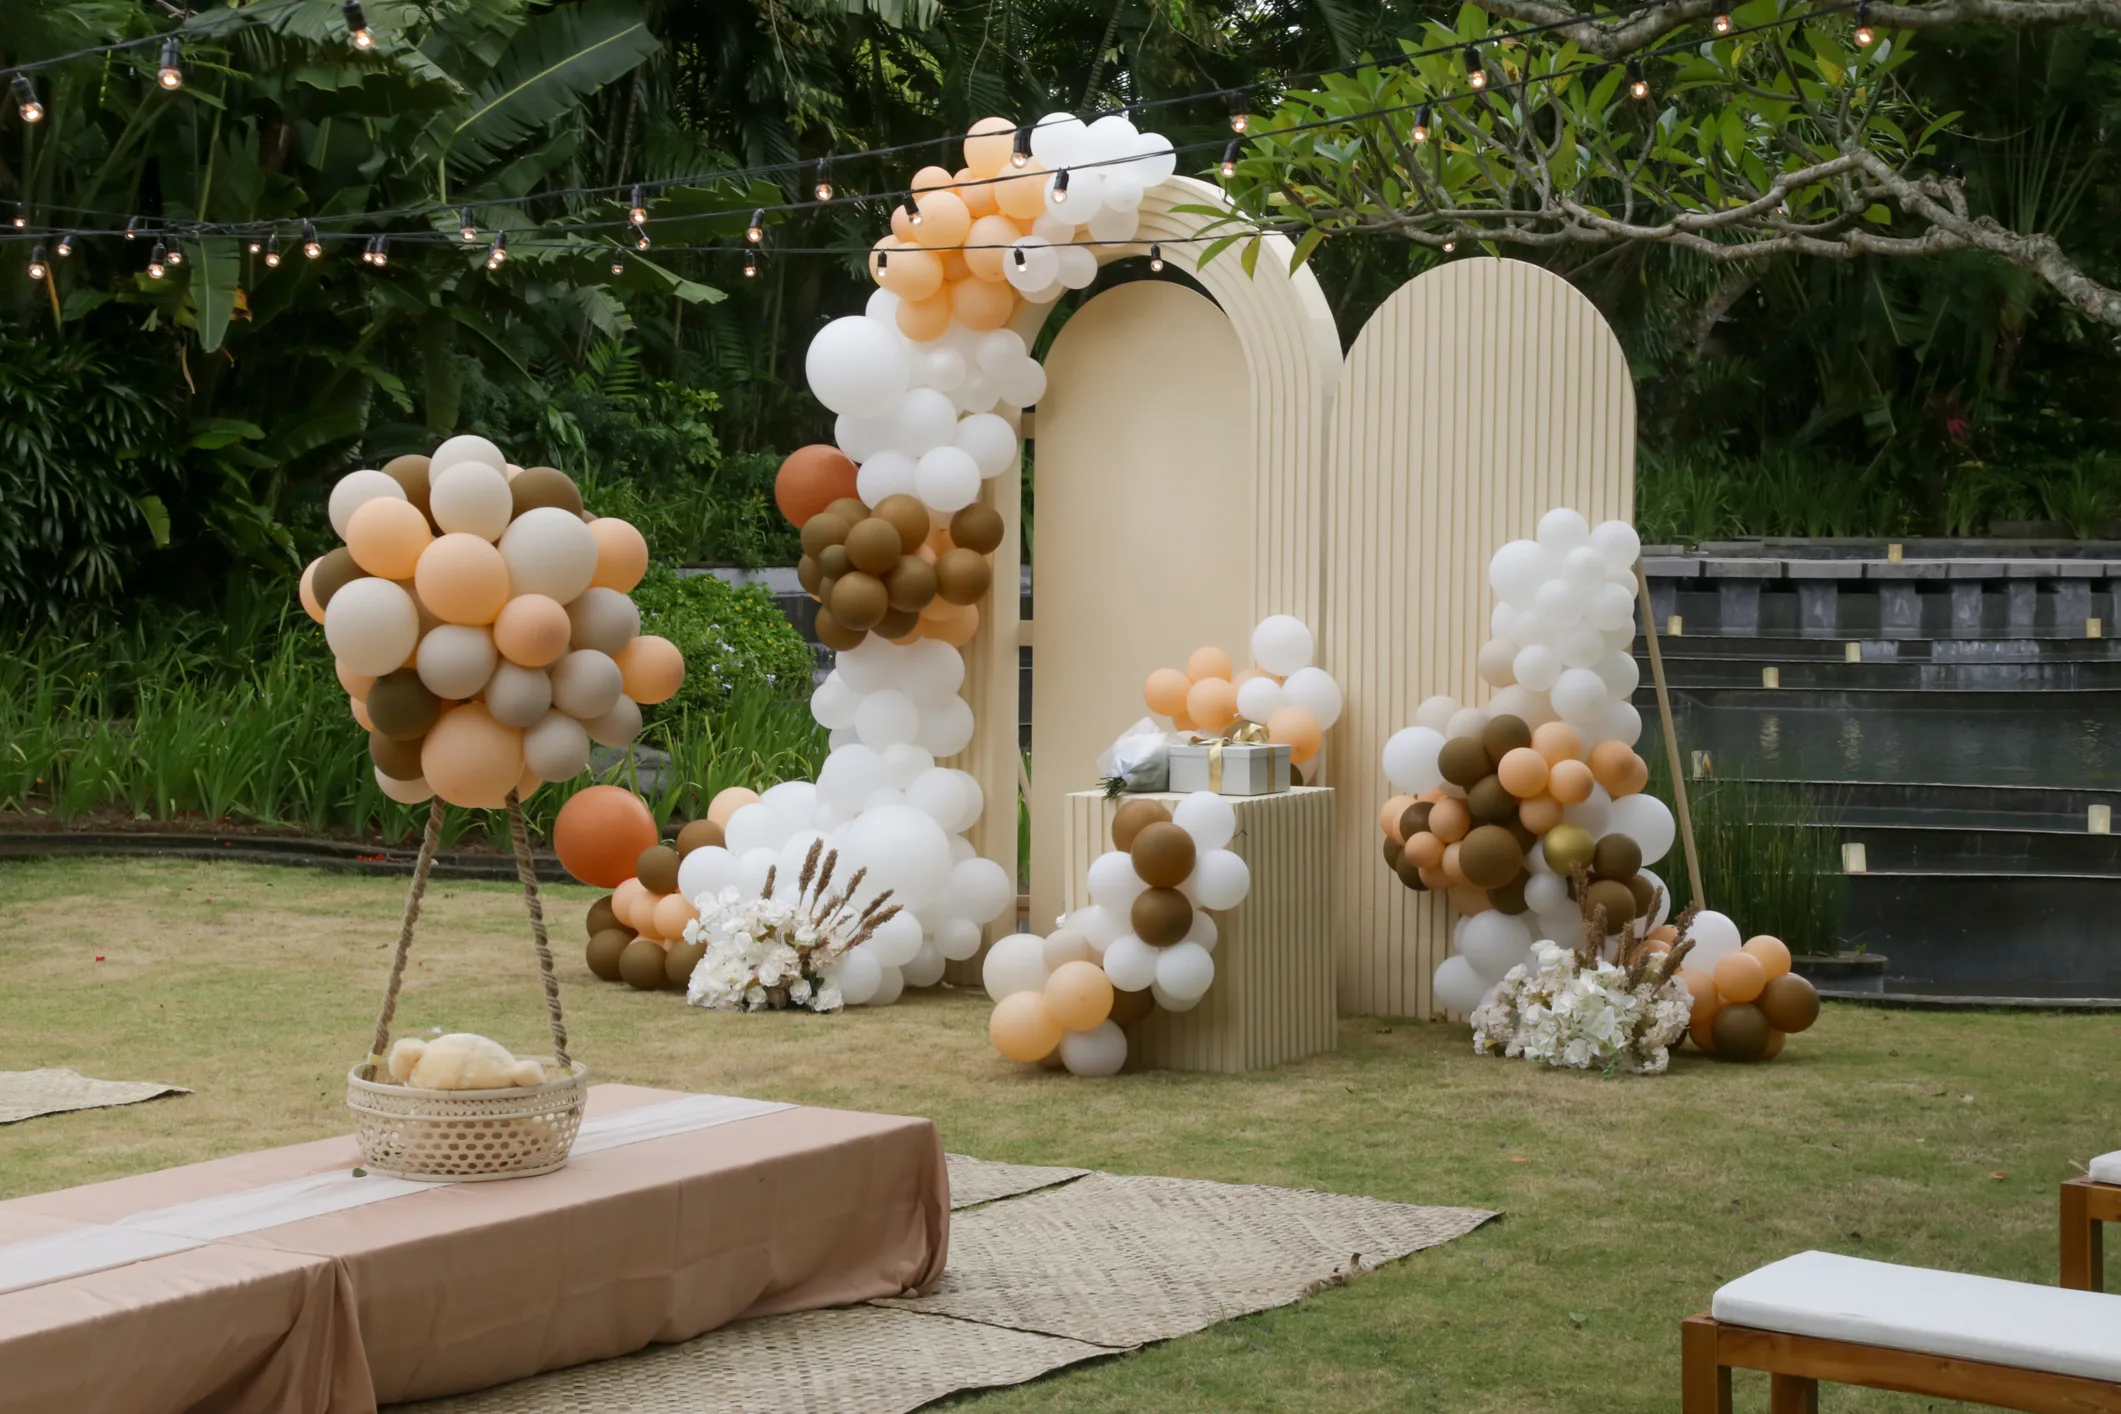 Creative baby shower or decoration in the garden. Bohemian style outdoor event set up with balloons. White cream peach caramel balloon arch kit.